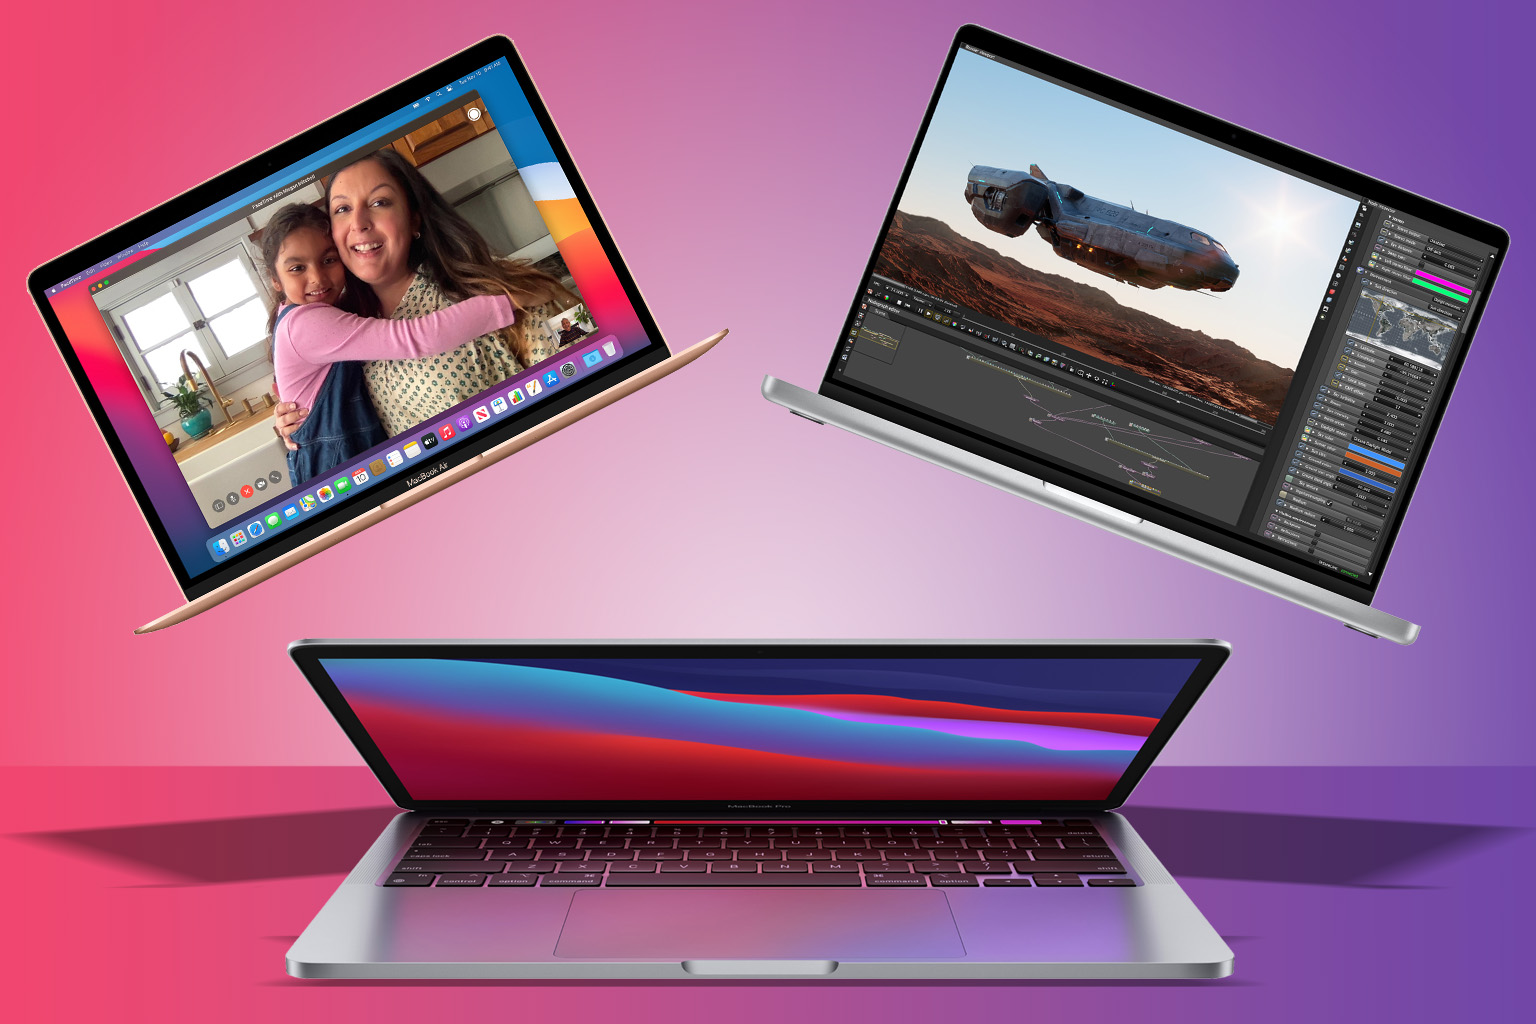 MacBook Air Vs. MacBook Pro: Which of Apple's New Laptops Is Right For You?